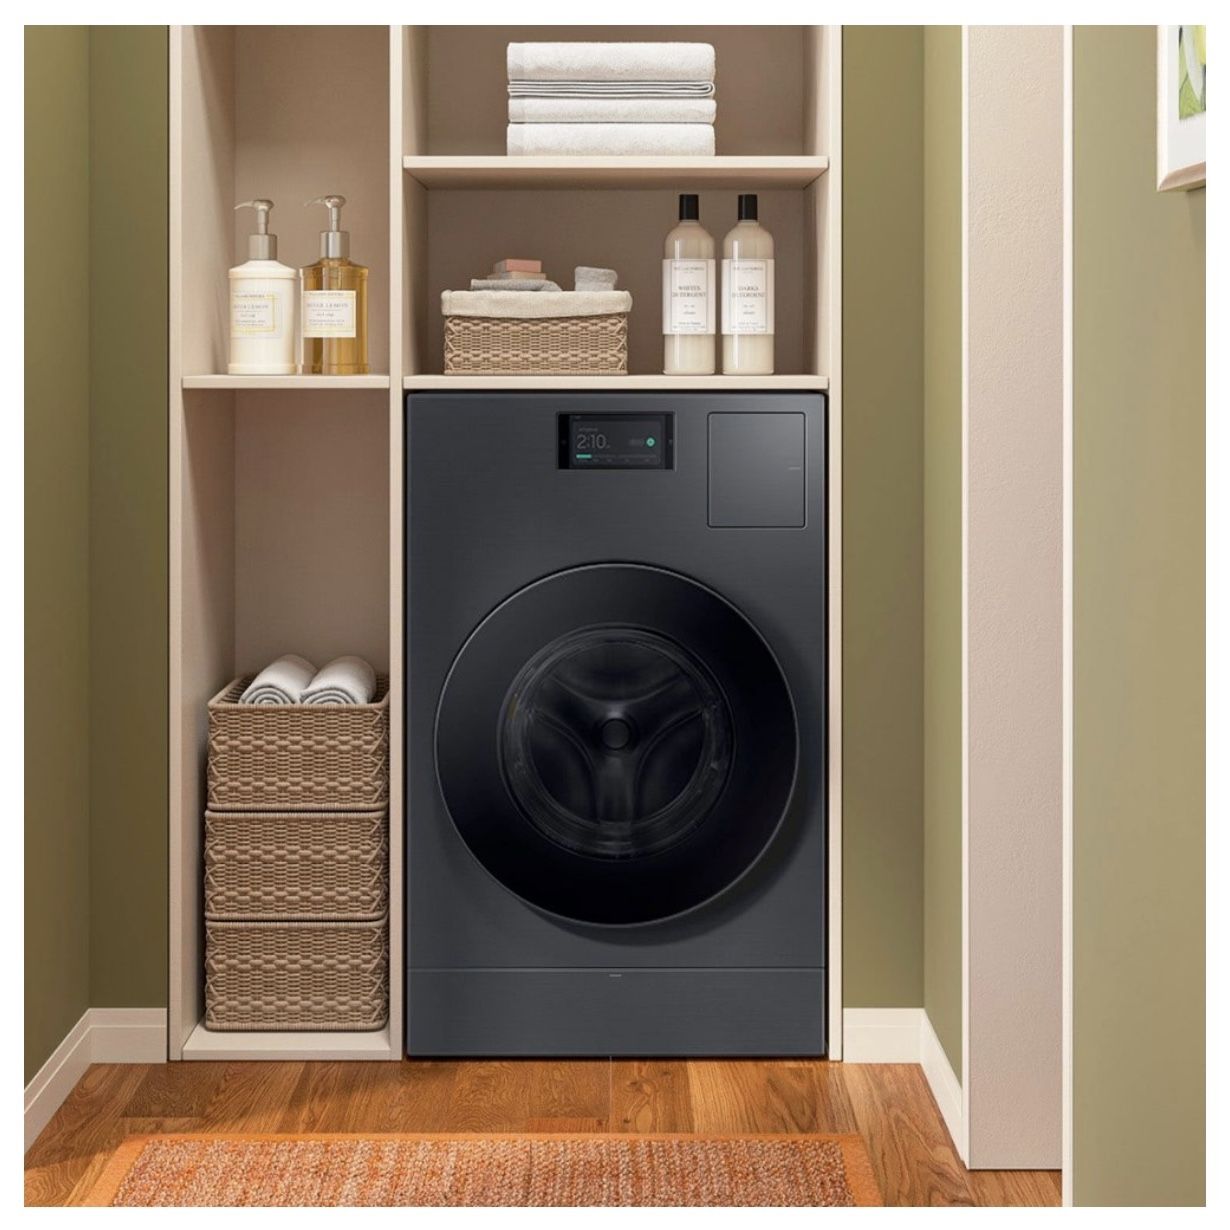 Samsung - Bespoke AI Laundry Combo 5.3 Cu. Ft. All-in-One Washer with Super Speed and Ventless Heat Pump Electric Dryer - Dark Steel